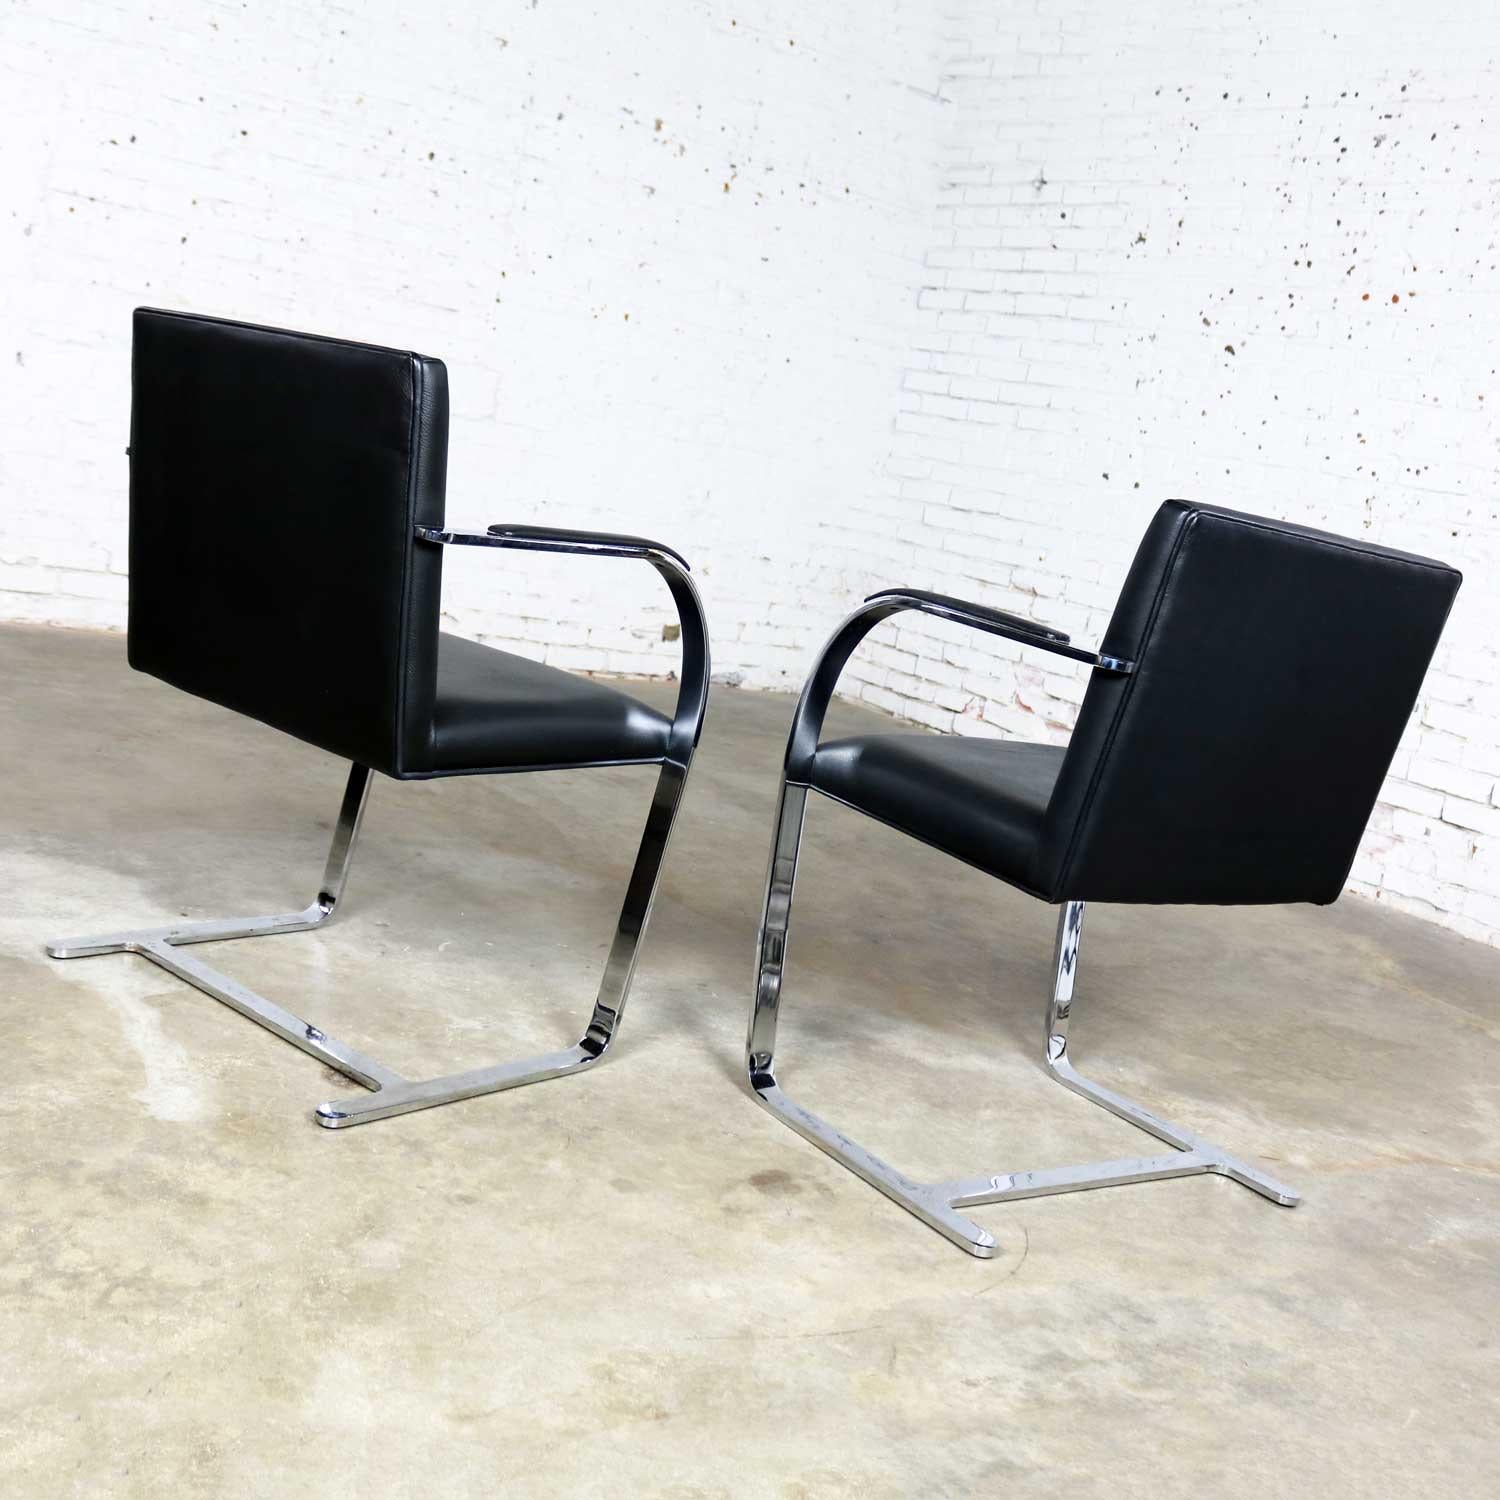 20th Century Black Leather Flat Bar Brno Chairs by Mies Van Der Rohe & Lilly Reich by Gordon